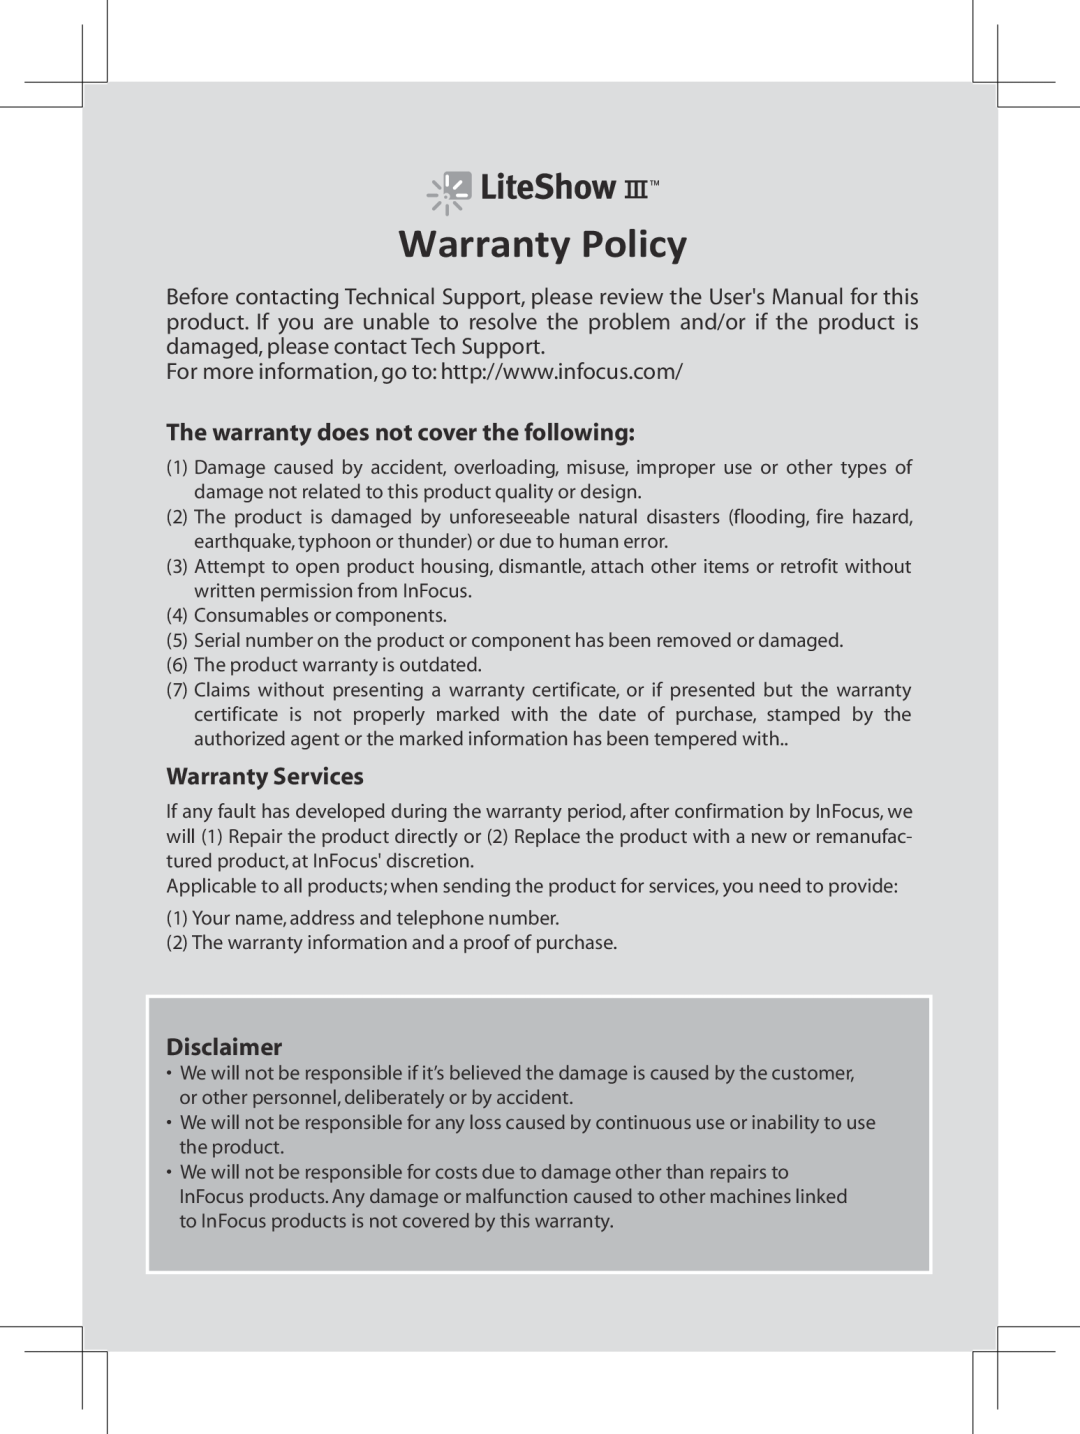 InFocus INLITESHOW3 manual Warranty Policy, The warranty does not cover the following, Warranty Services, Disclaimer 